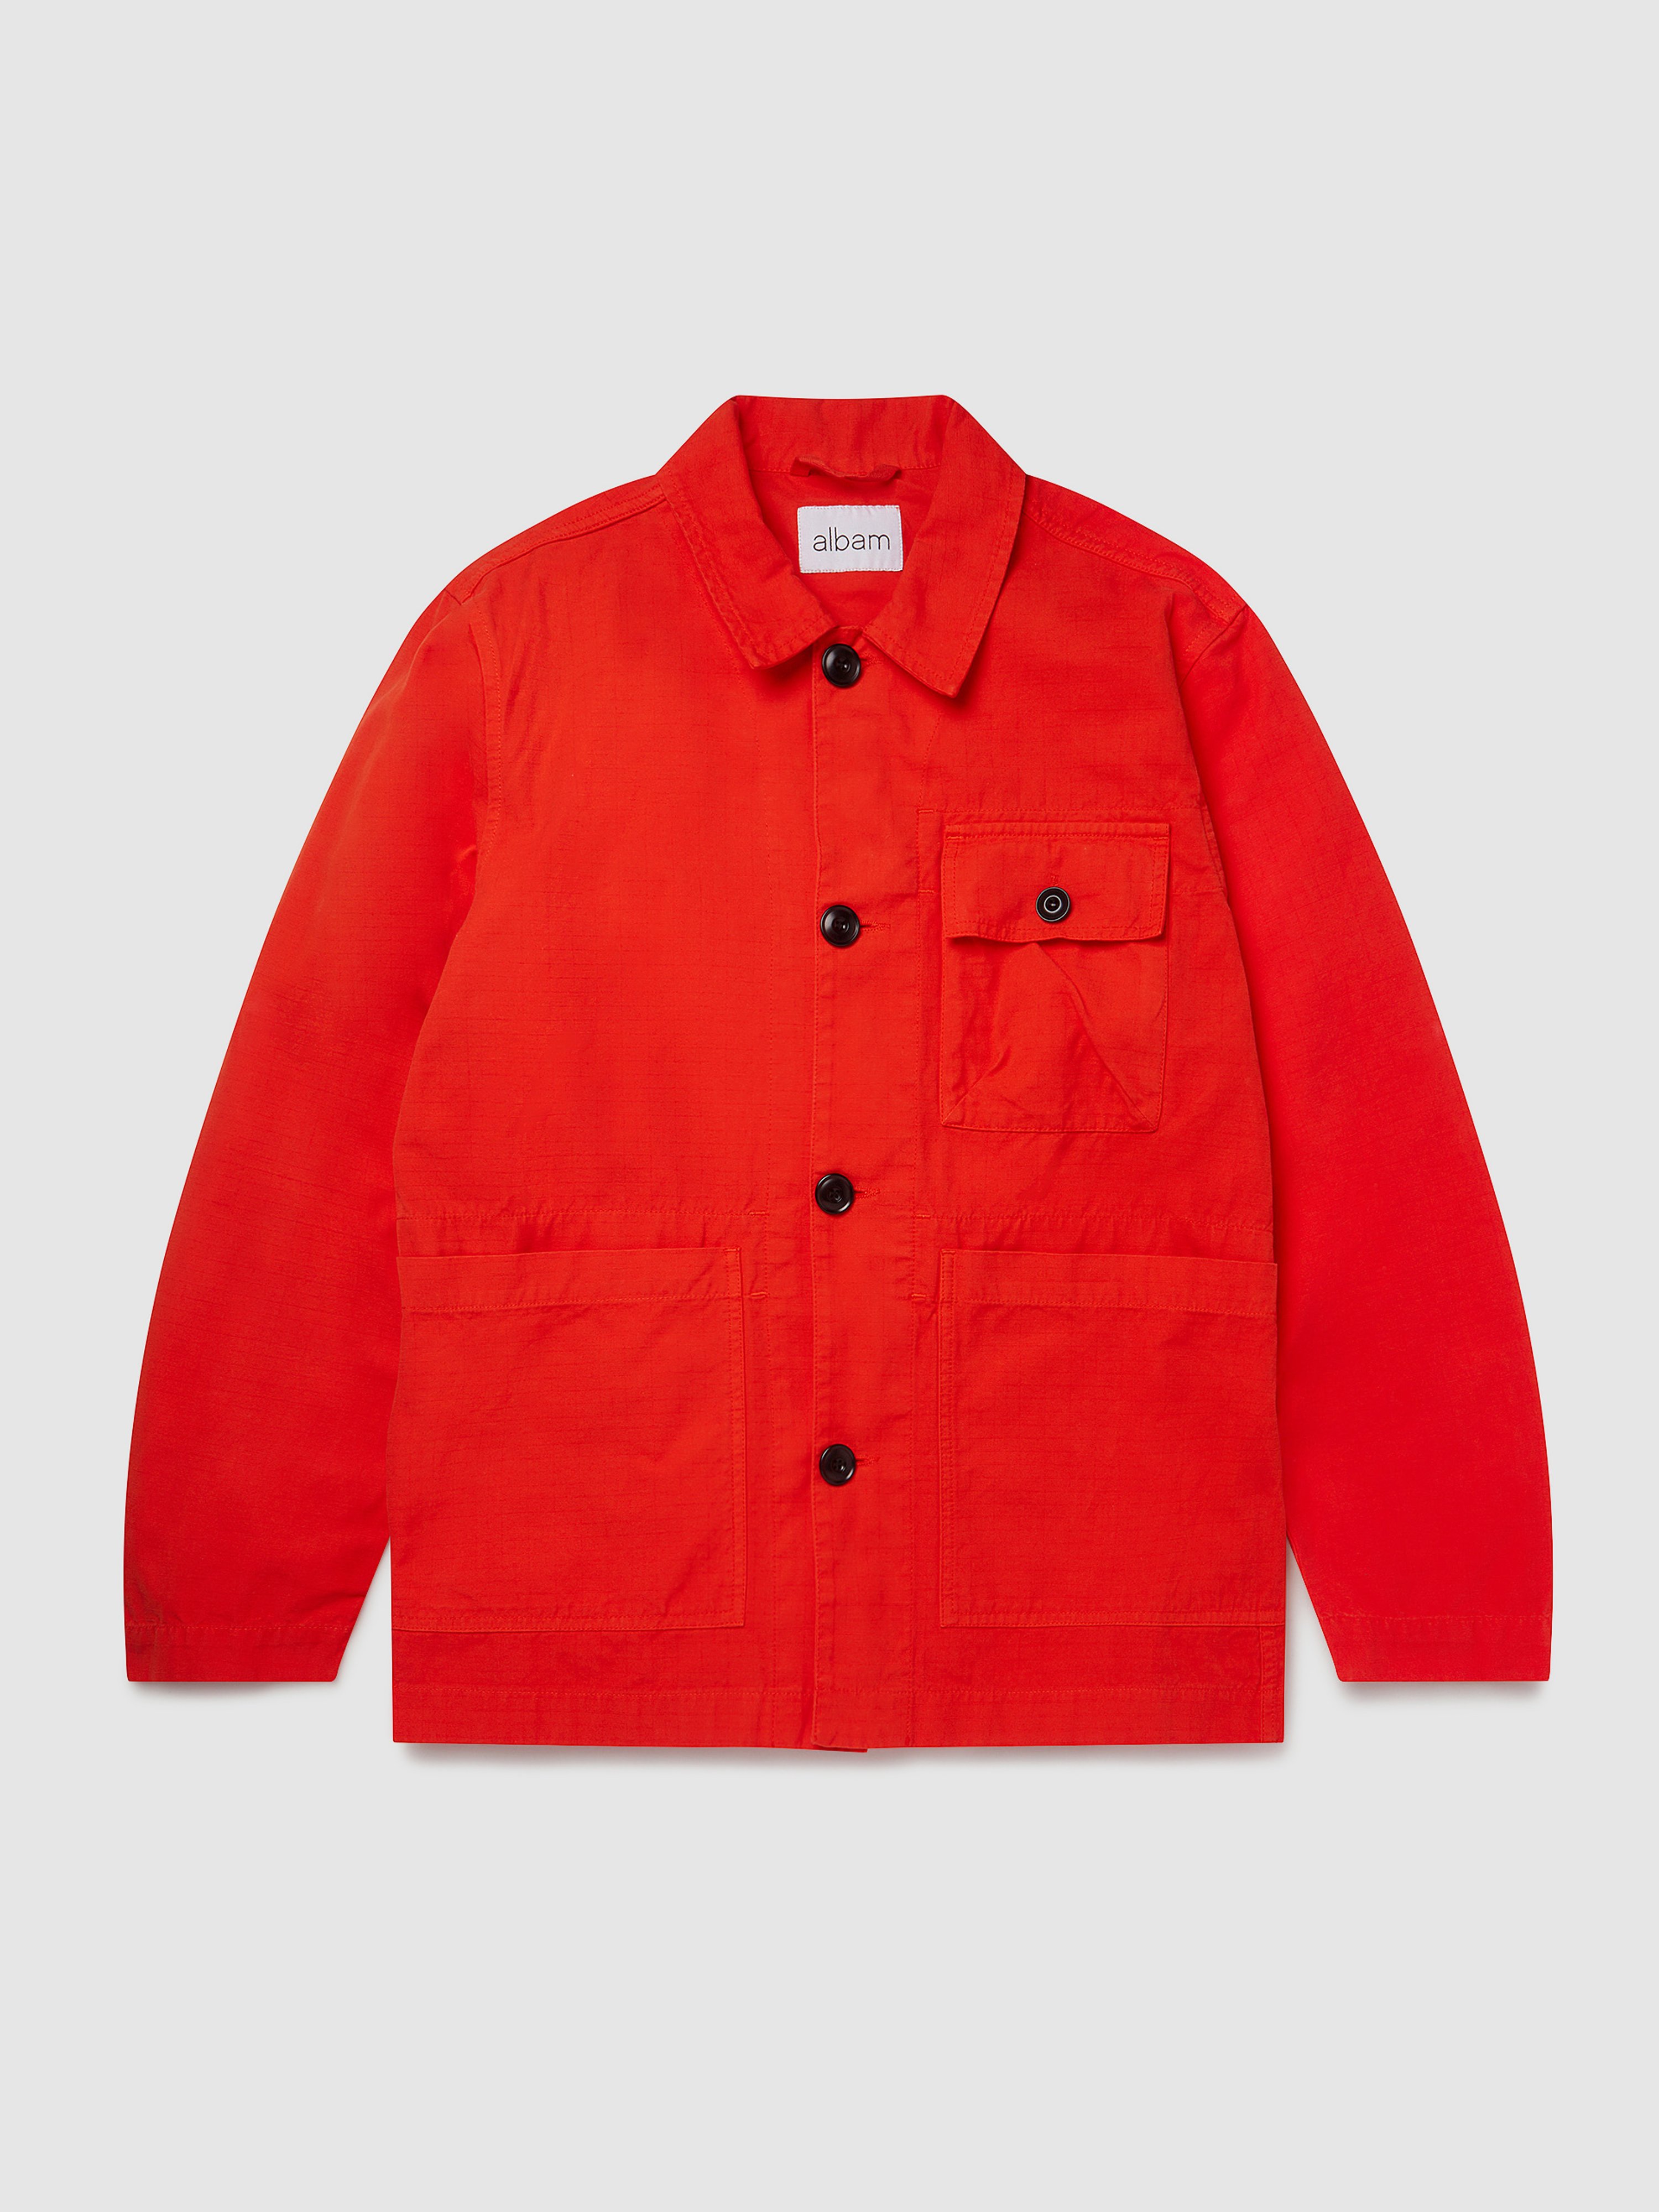 Albam Gd Ripstop Rail Jacket In Red